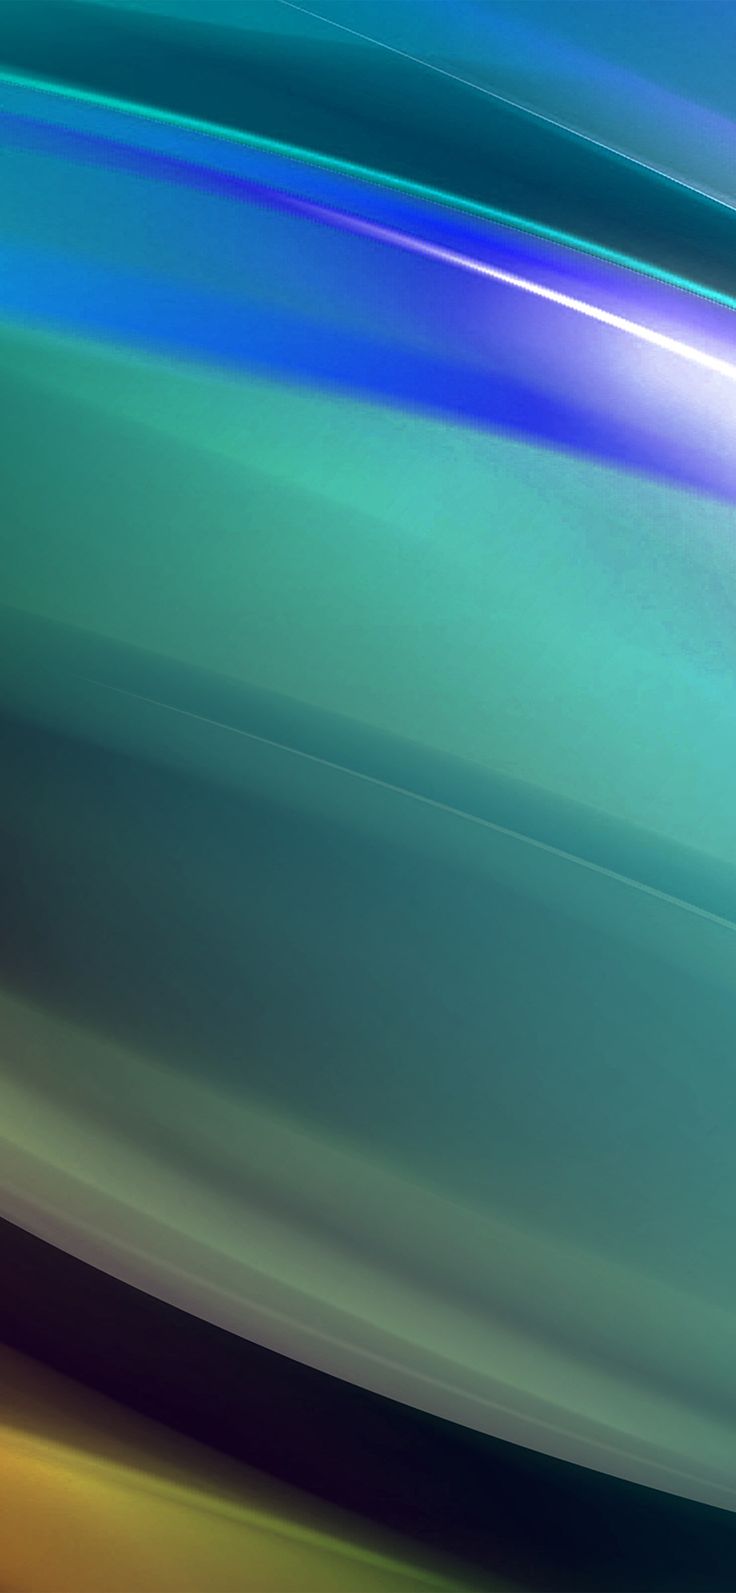 Iphone X Wallpaper - Teal Turquoise Abstract Curve Wallpaper For Iphone , HD Wallpaper & Backgrounds